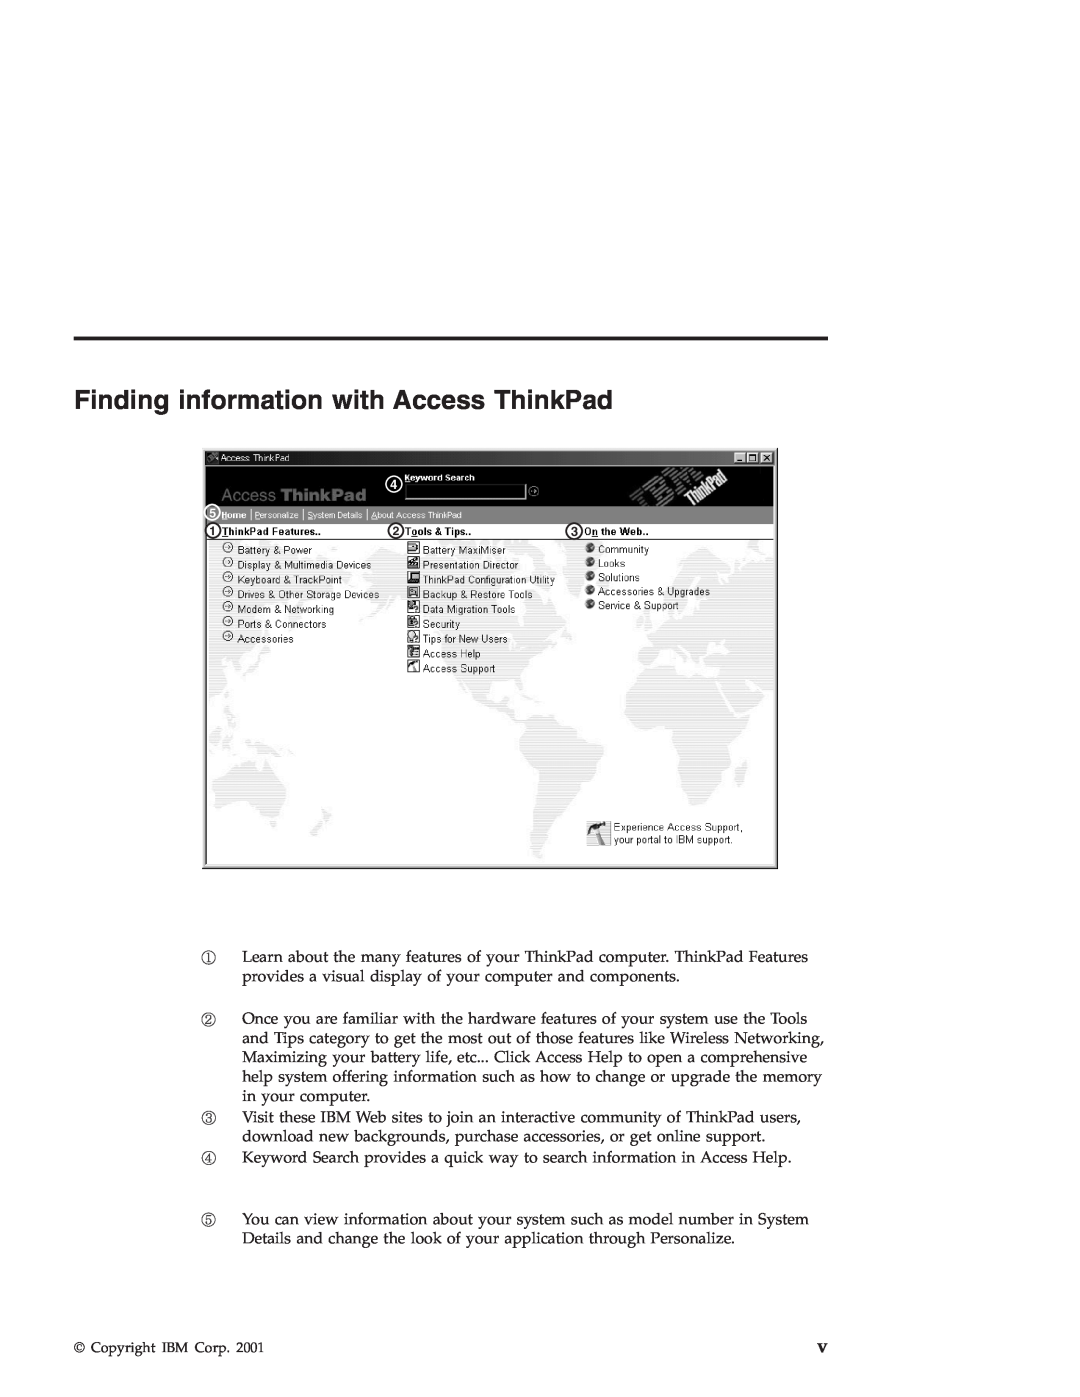 IBM R30 manual Finding information with Access ThinkPad 